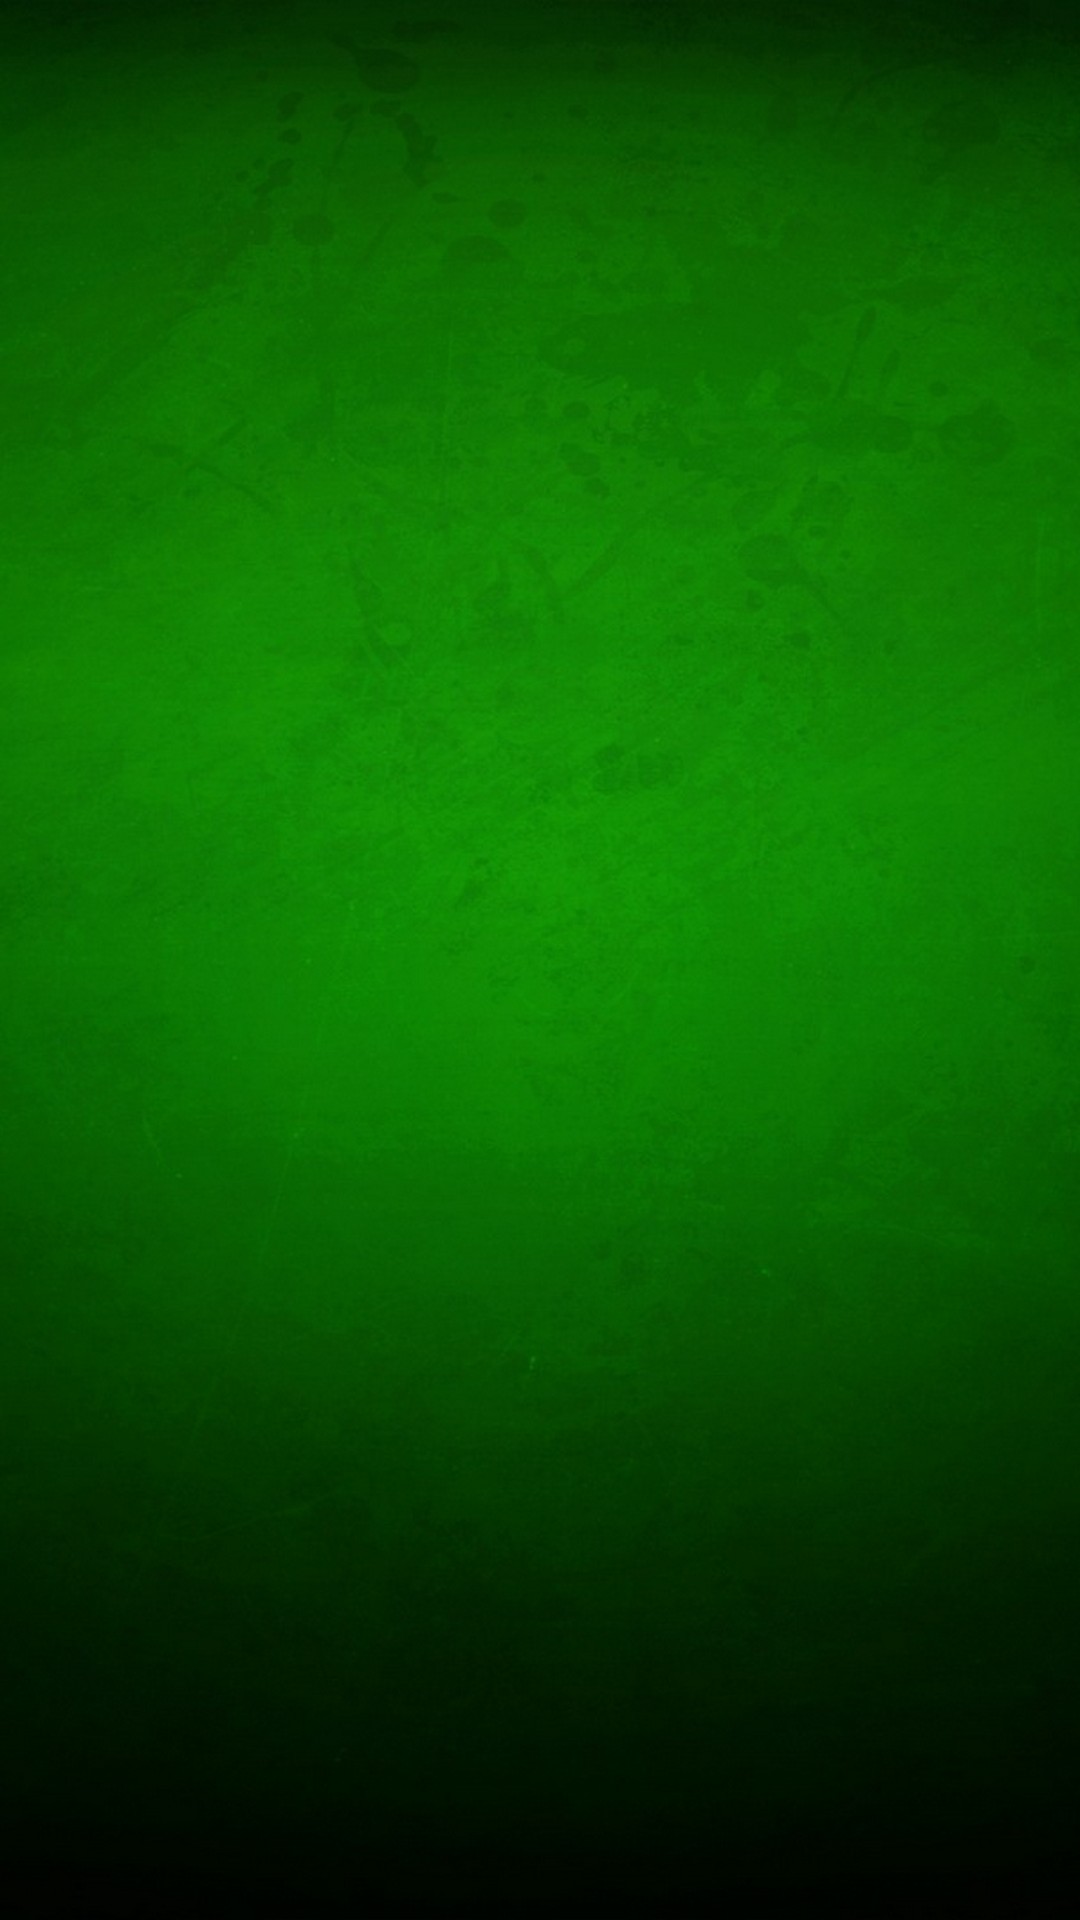 Wallpapers Phone Black and Green with resolution 1080X1920 pixel. You can make this wallpaper for your Android backgrounds, Tablet, Smartphones Screensavers and Mobile Phone Lock Screen